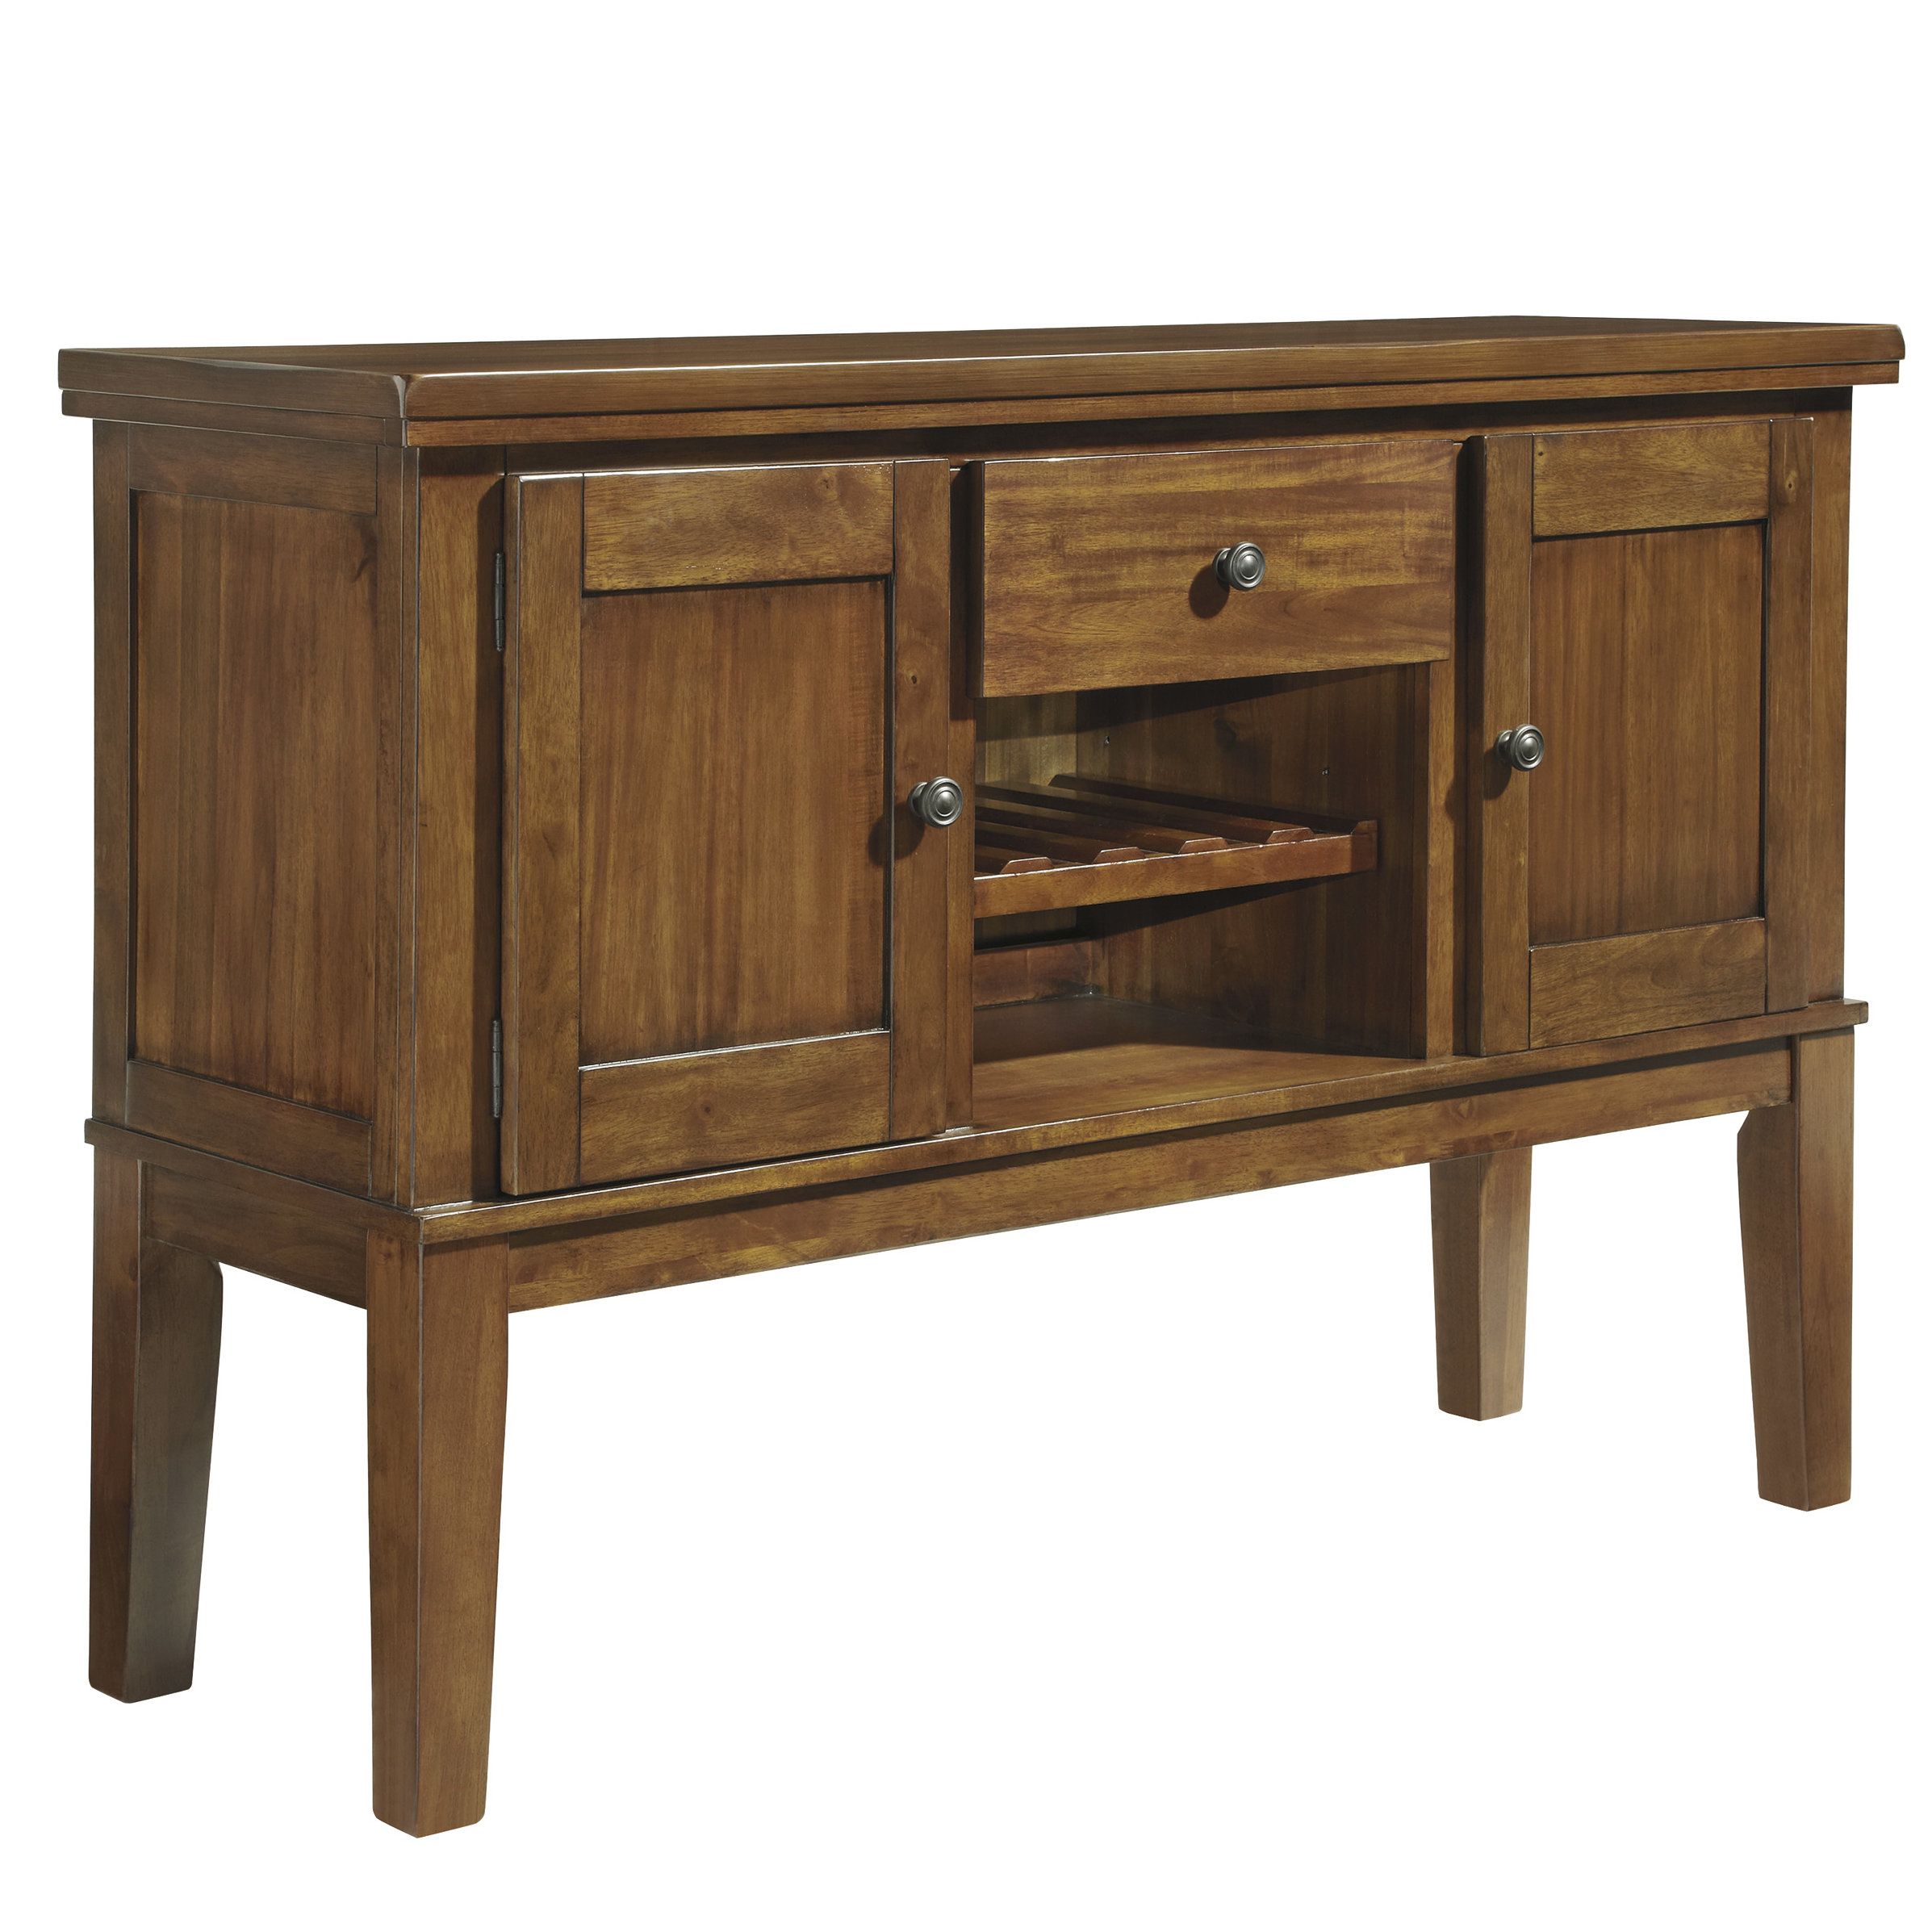 Rebecca Buffet Table & Reviews | Joss & Main Pertaining To Stillwater Sideboards (View 19 of 30)